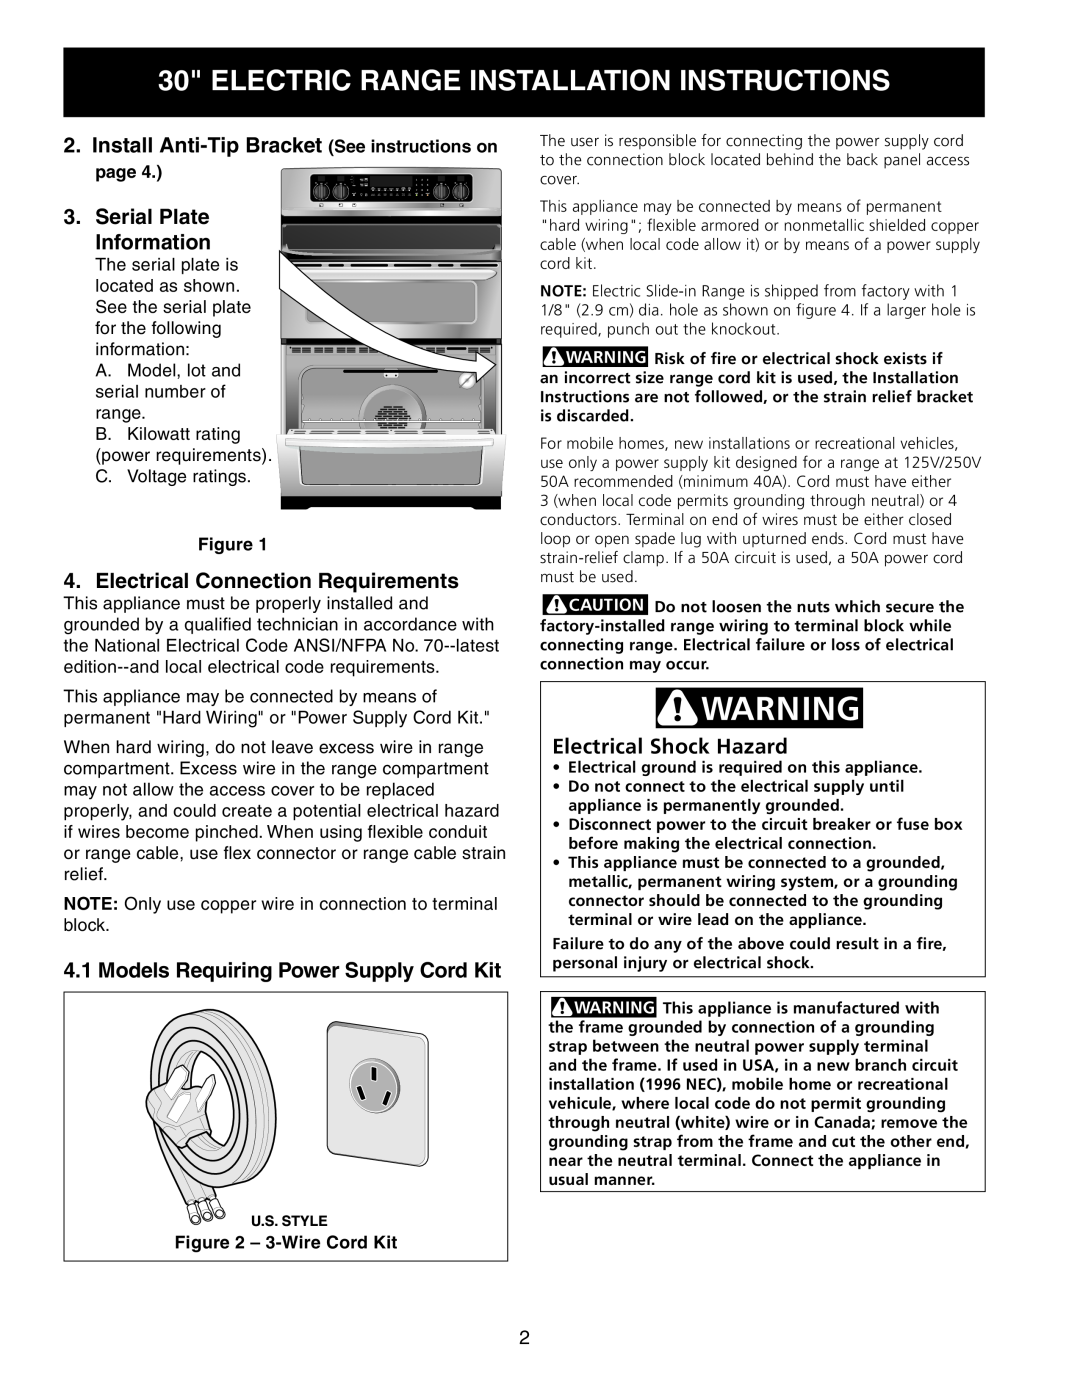 Frigidaire 318201724 Electrical Connection Requirements, Models Requiring Power Supply Cord Kit, Electrical Shock Hazard 